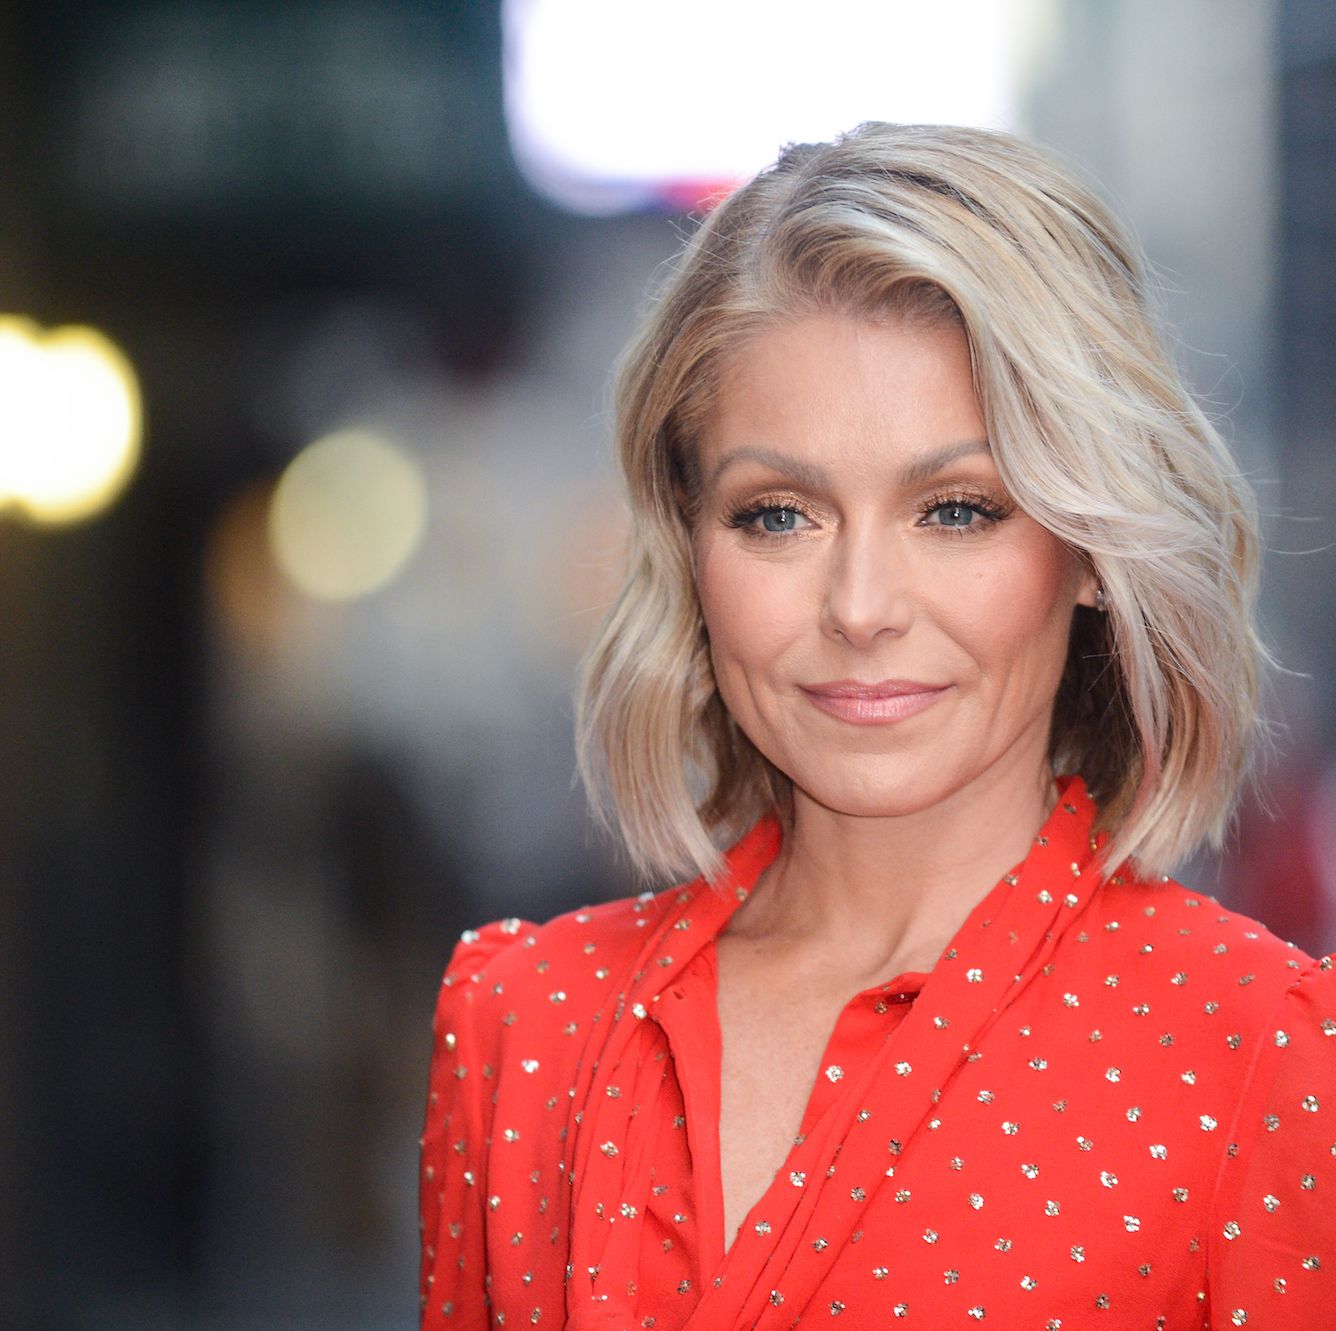 Kelly Ripa, 52, Shares the ‘Brightening’ Cleansing Pads She’s ‘Really Into’